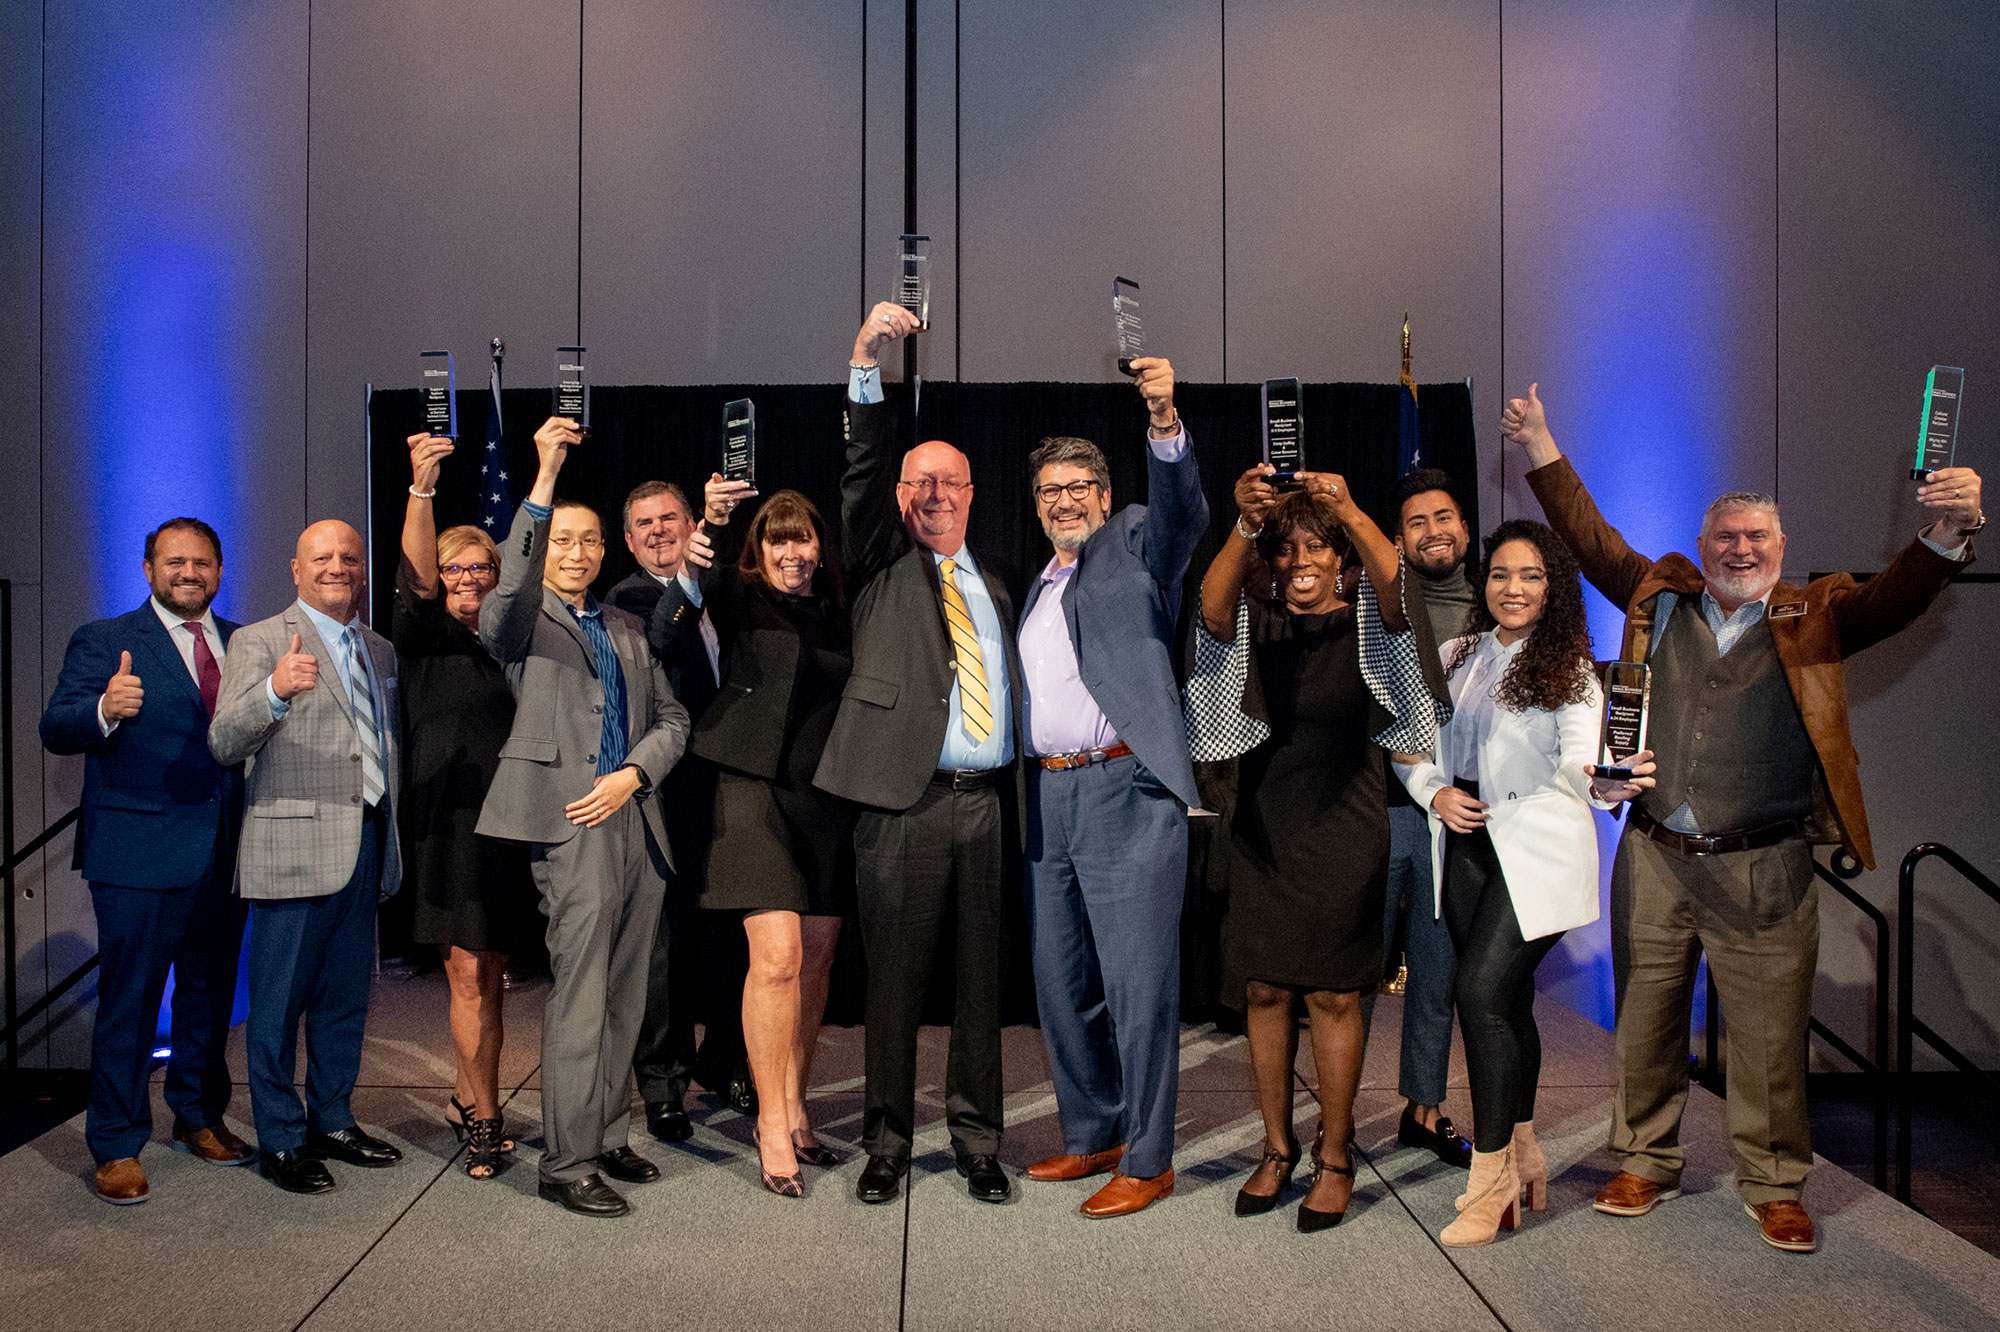 2021 Small Business Award Winners Announced at Annual Event